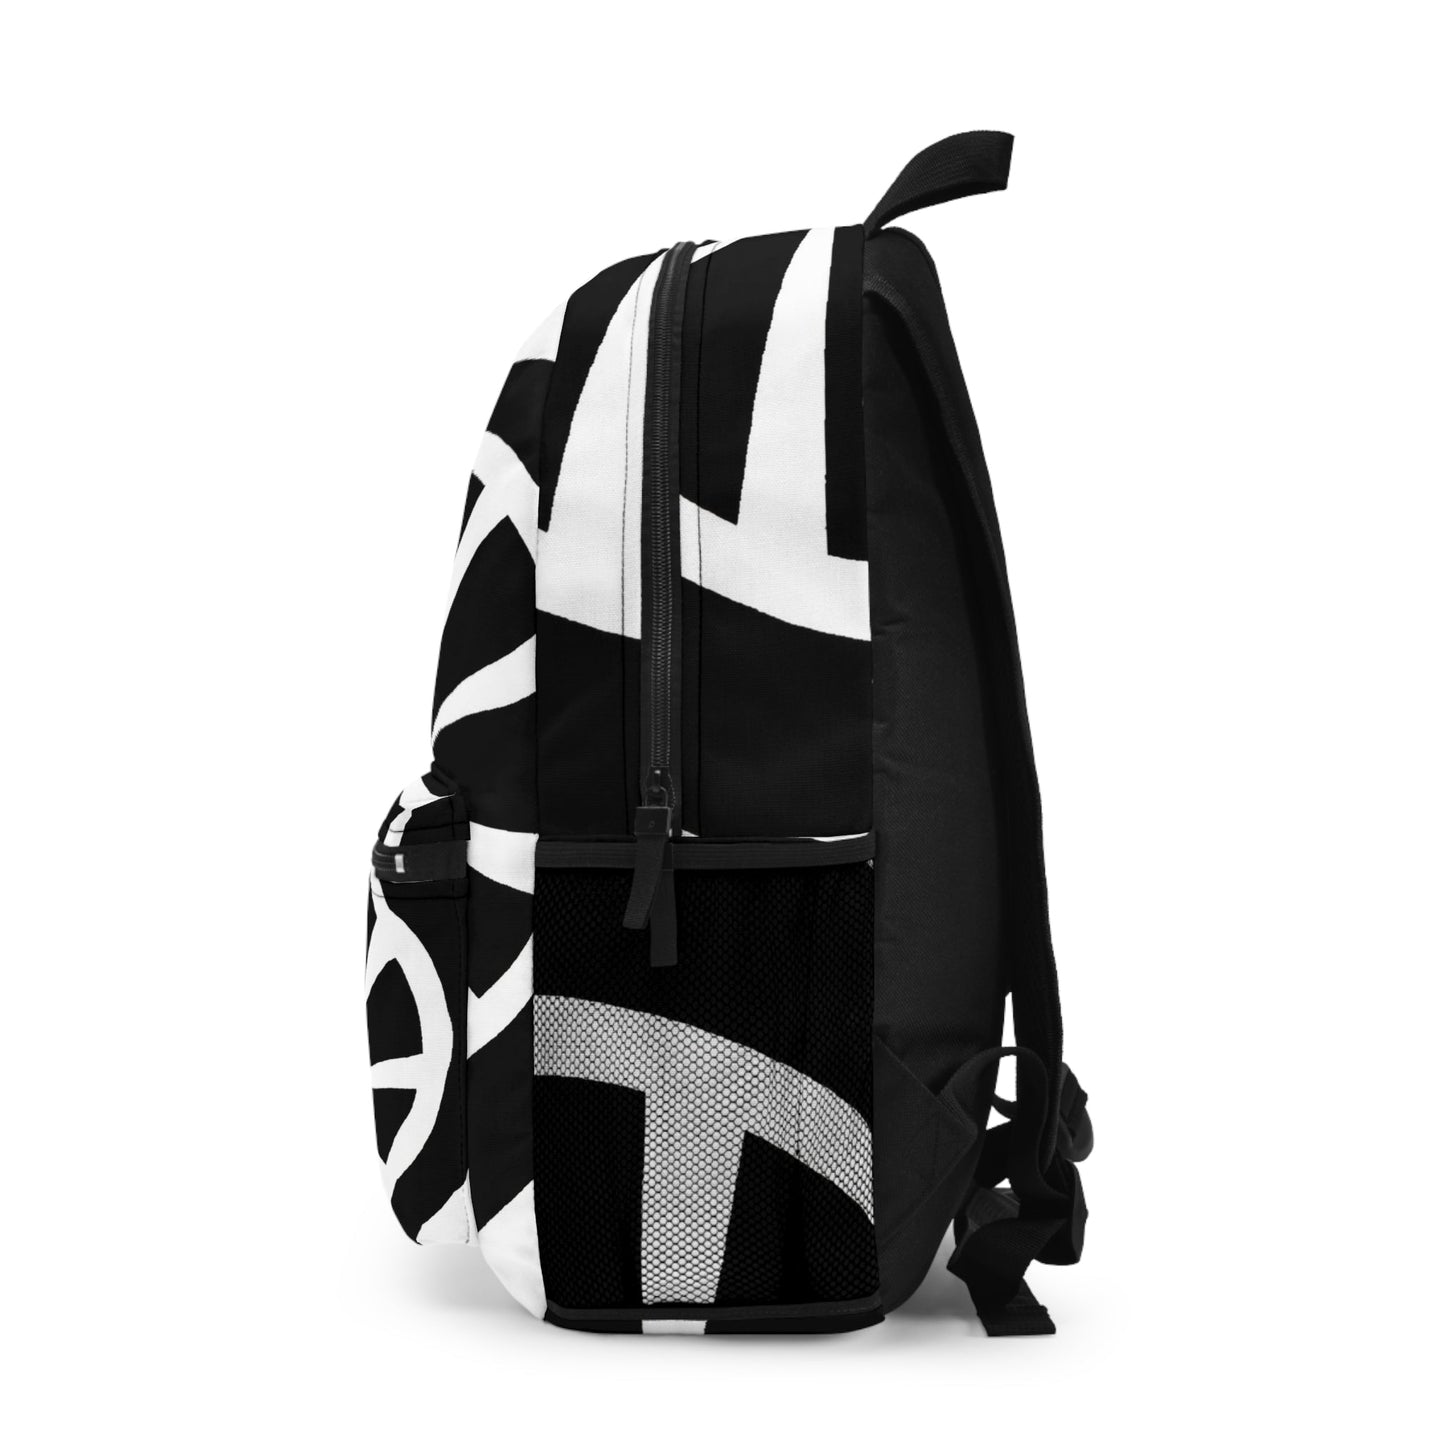 Backpack - Large Water-Resistant Bag, Black And White Geometric